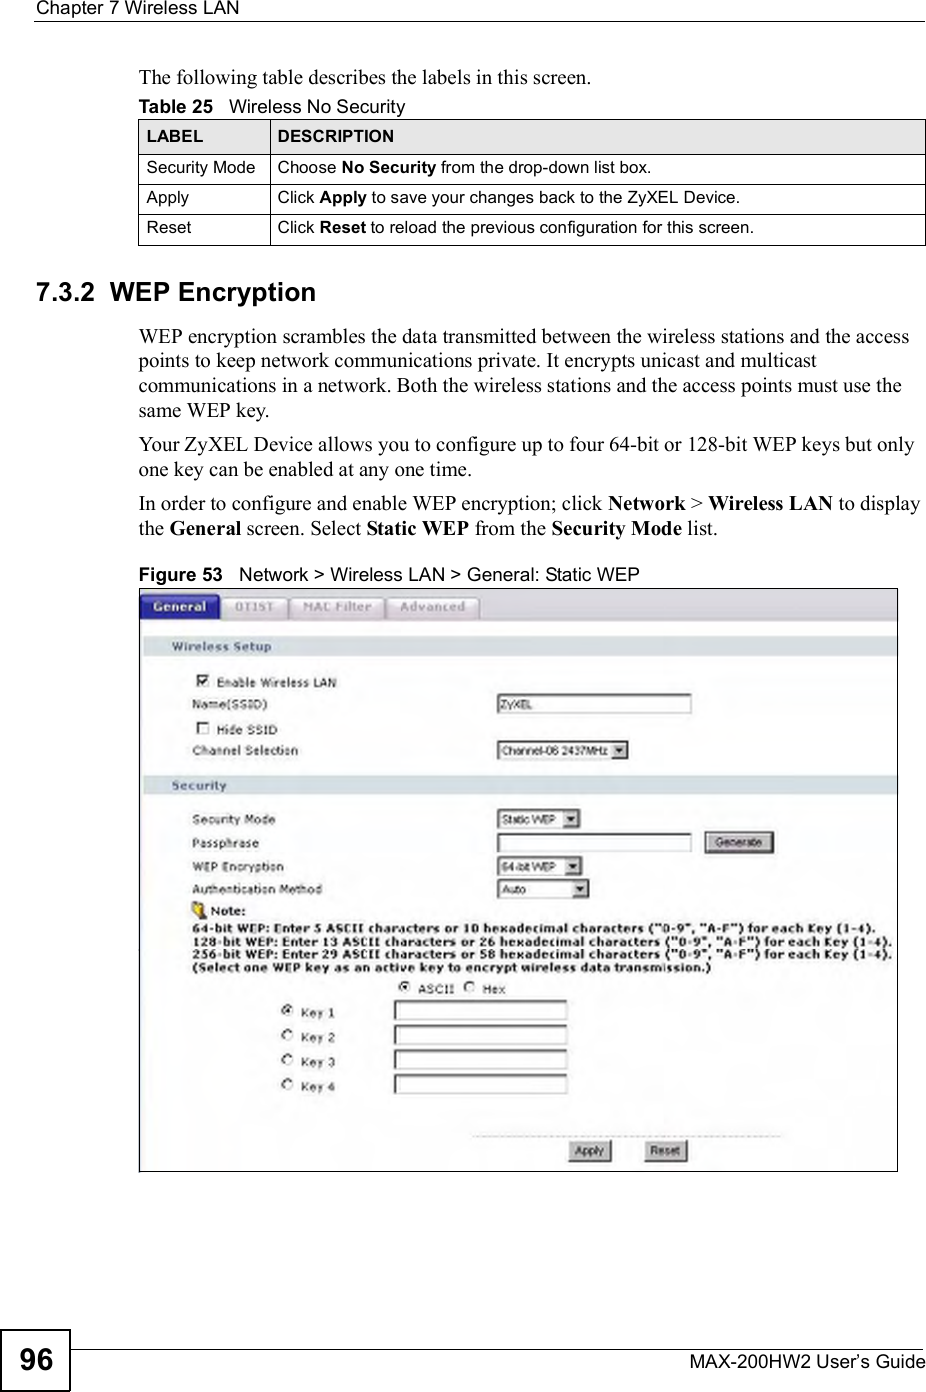 Chapter 7Wireless LANMAX-200HW2 User s Guide96The following table describes the labels in this screen.7.3.2  WEP EncryptionWEP encryption scrambles the data transmitted between the wireless stations and the access points to keep network communications private. It encrypts unicast and multicast communications in a network. Both the wireless stations and the access points must use the same WEP key.Your ZyXEL Device allows you to configure up to four 64-bit or 128-bit WEP keys but only one key can be enabled at any one time.In order to configure and enable WEP encryption; click Network &gt; Wireless LAN to display the General screen. Select Static WEP from the Security Mode list.Figure 53   Network &gt; Wireless LAN &gt; General: Static WEPTable 25   Wireless No SecurityLABEL DESCRIPTIONSecurity Mode Choose No Security from the drop-down list box.Apply Click Apply to save your changes back to the ZyXEL Device.Reset Click Reset to reload the previous configuration for this screen.